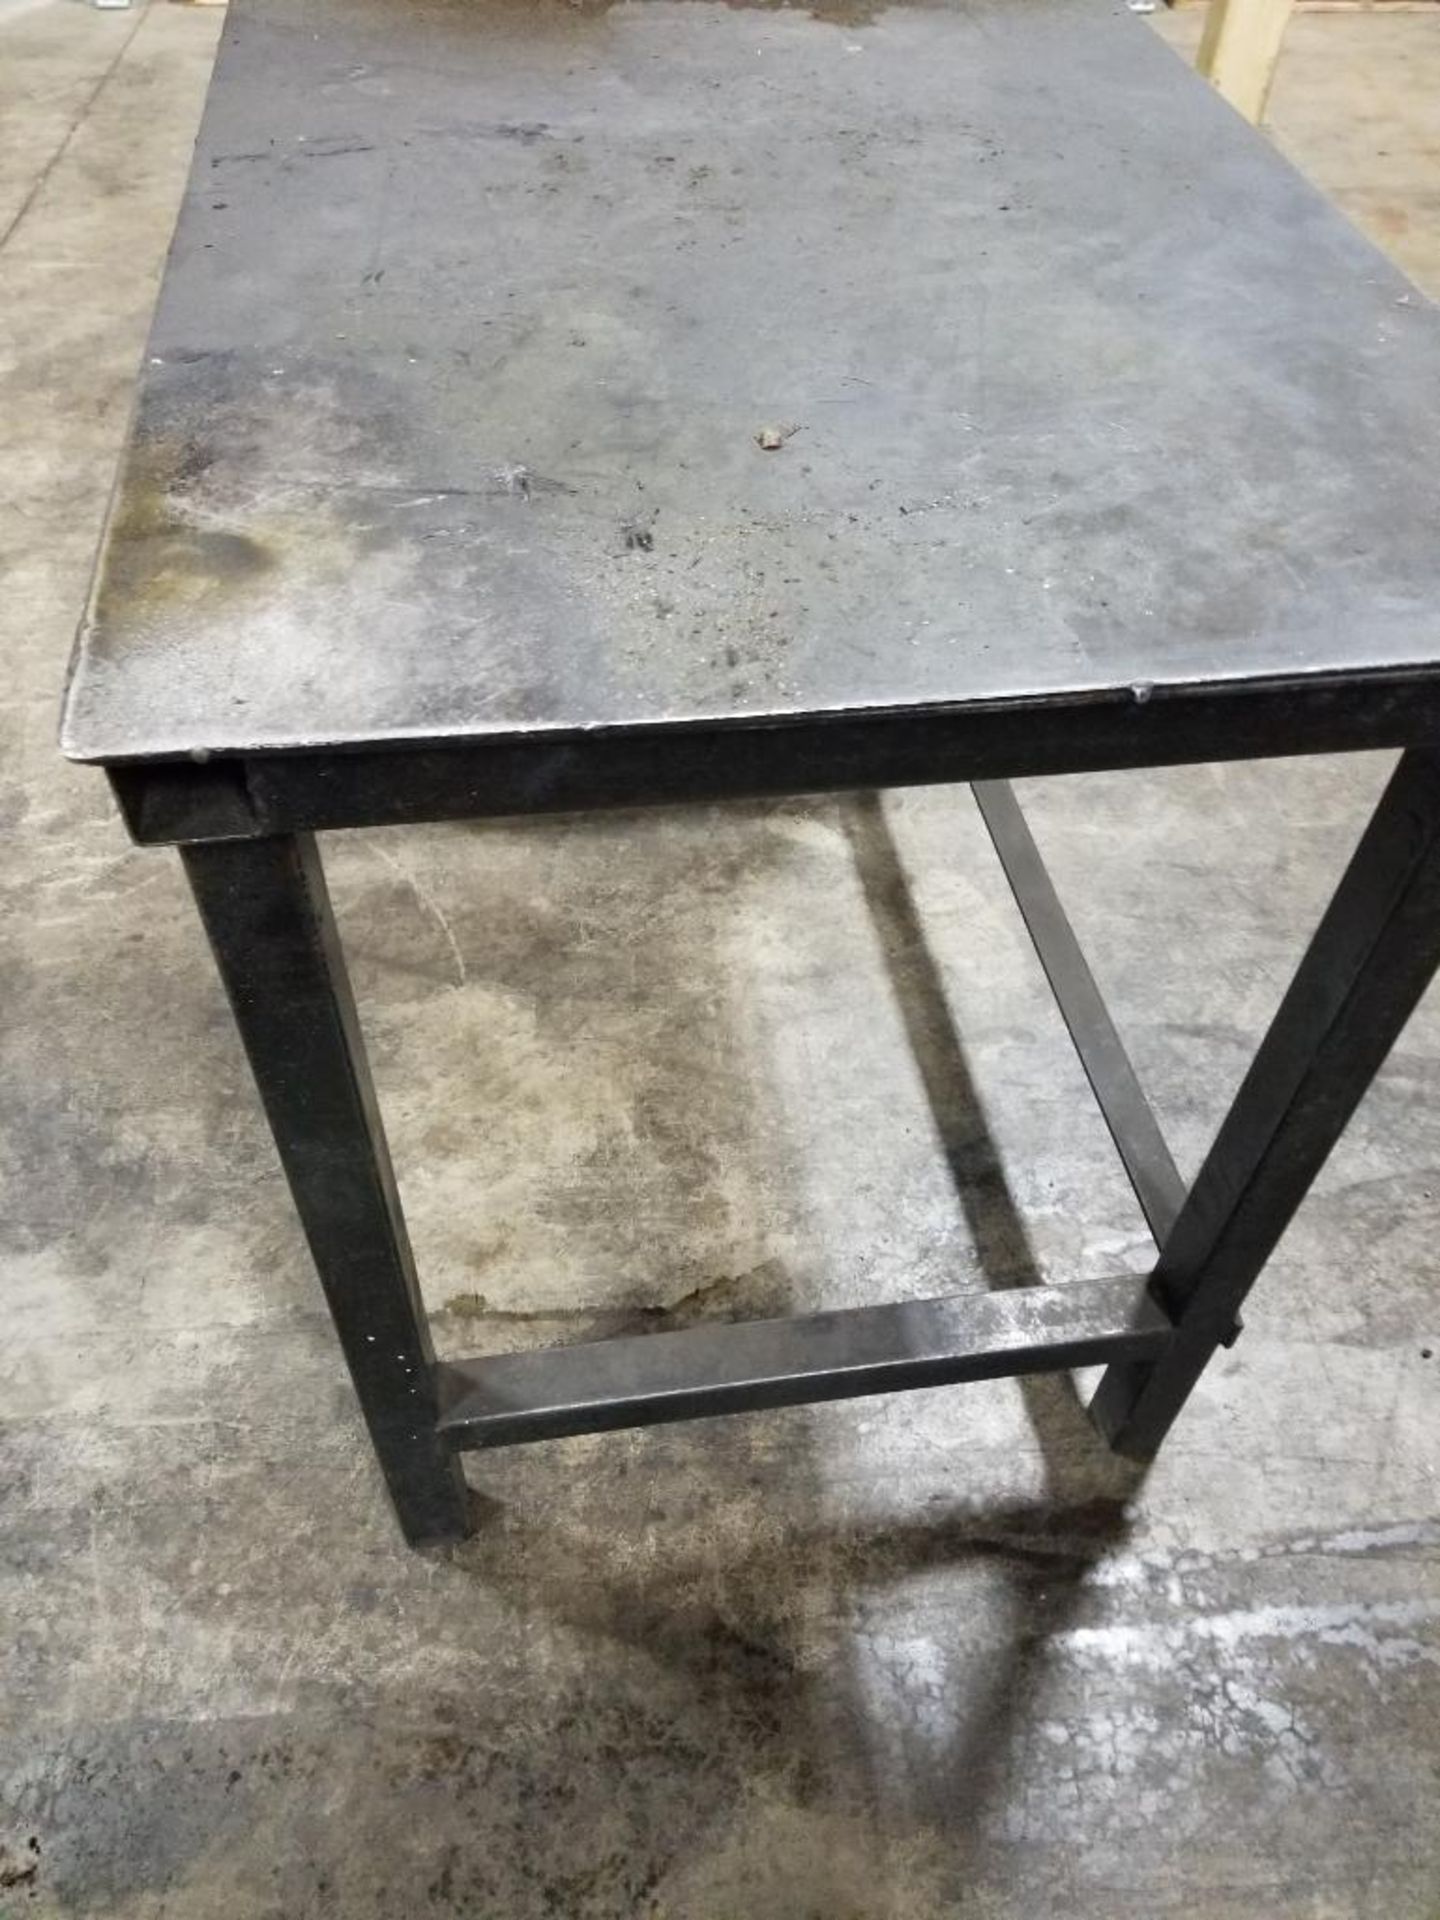 Qty 2 - Industrial work tables. 42x37x38, 43x27x37. LxWxH. - Image 7 of 8